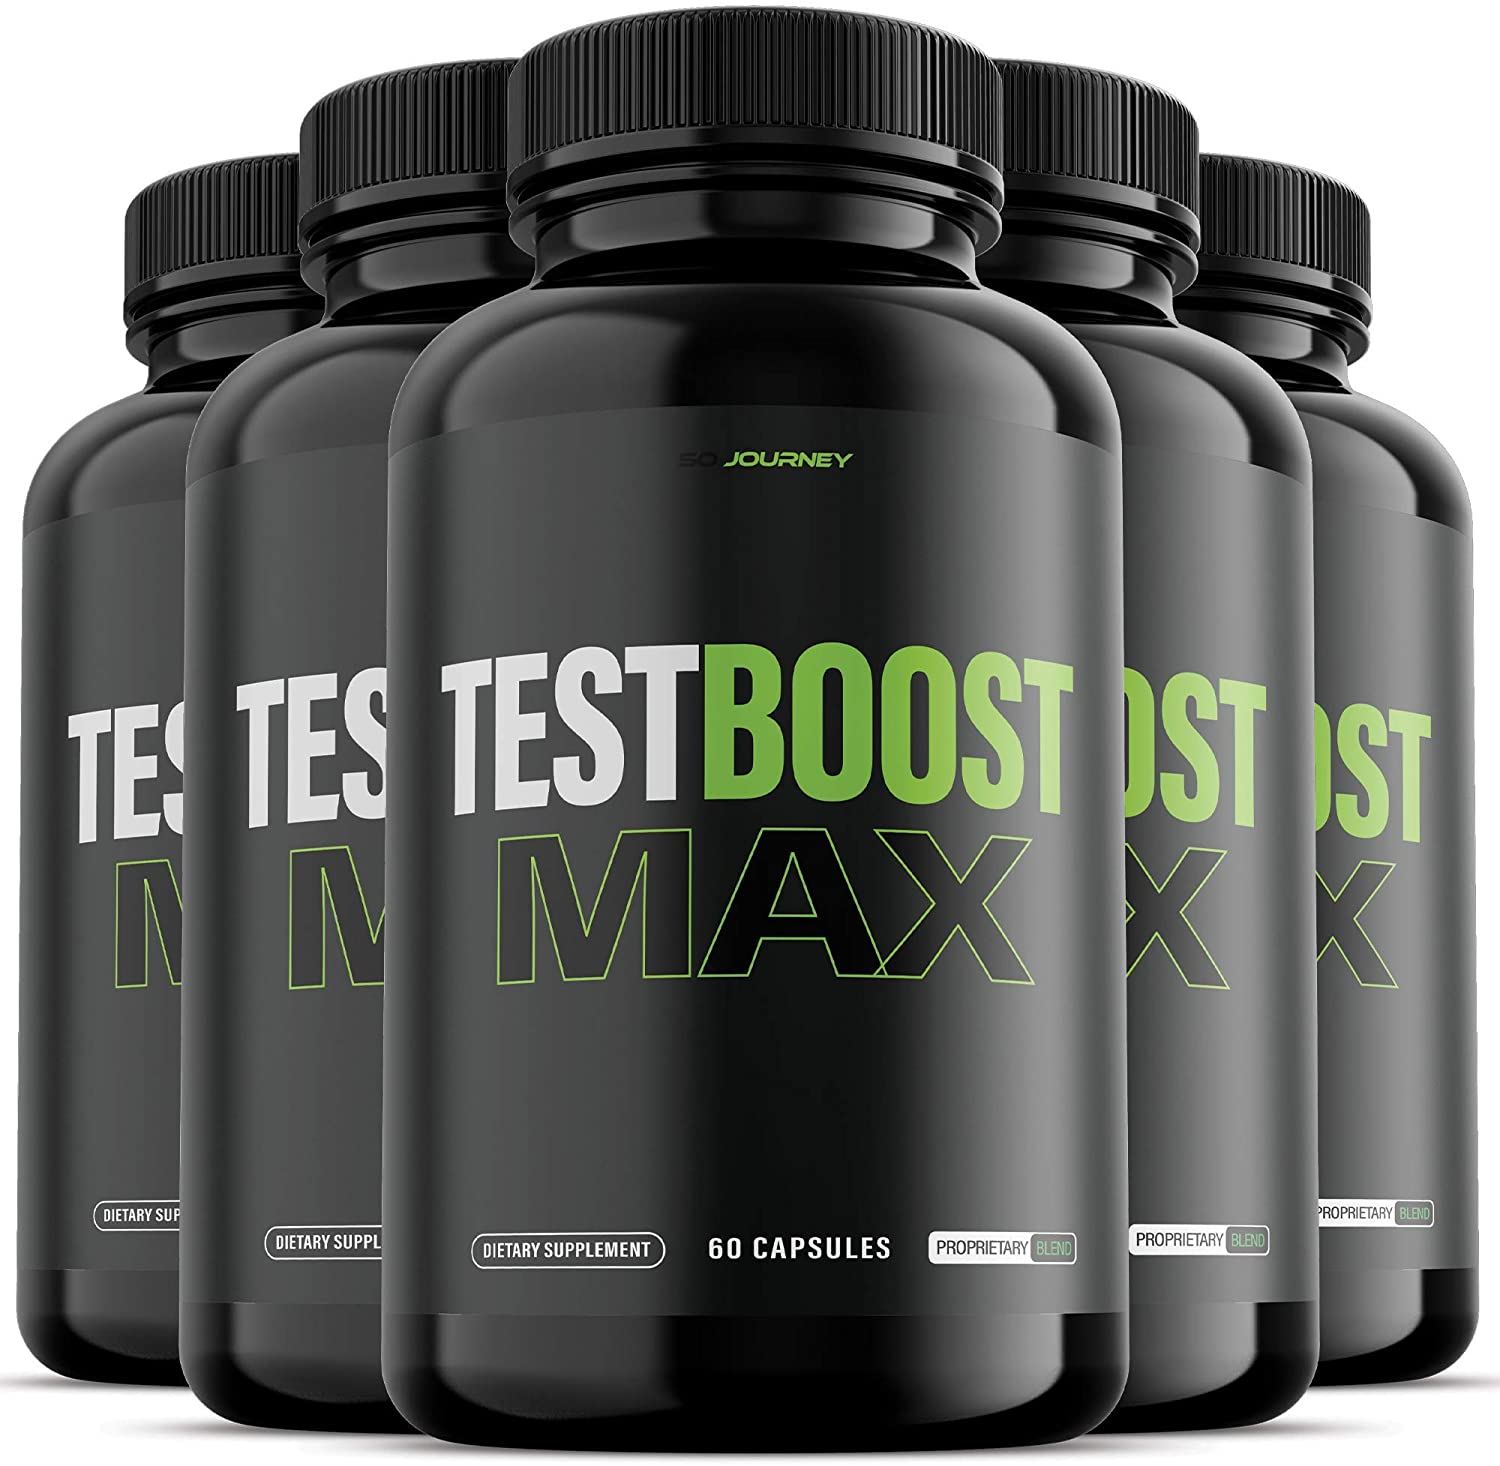 Five bottles of Test Boost Max standing close to each other